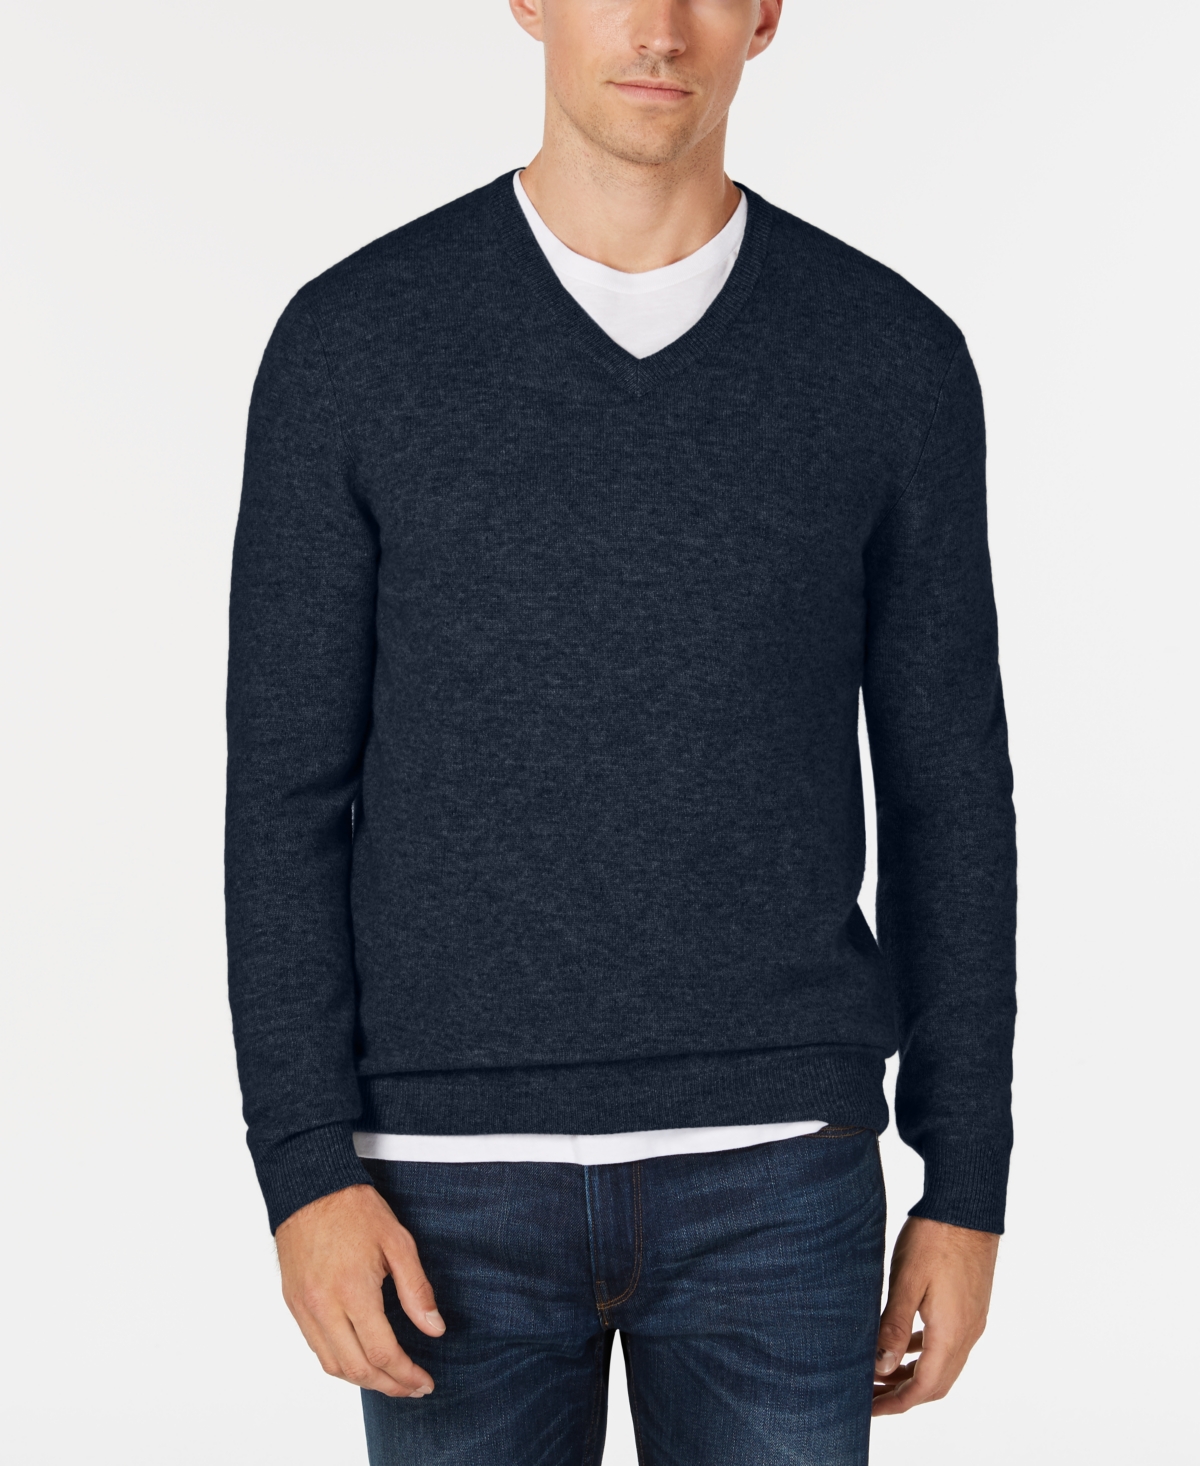 Men's V-Neck Cashmere Sweater, Created for Macy's - Navy Heather